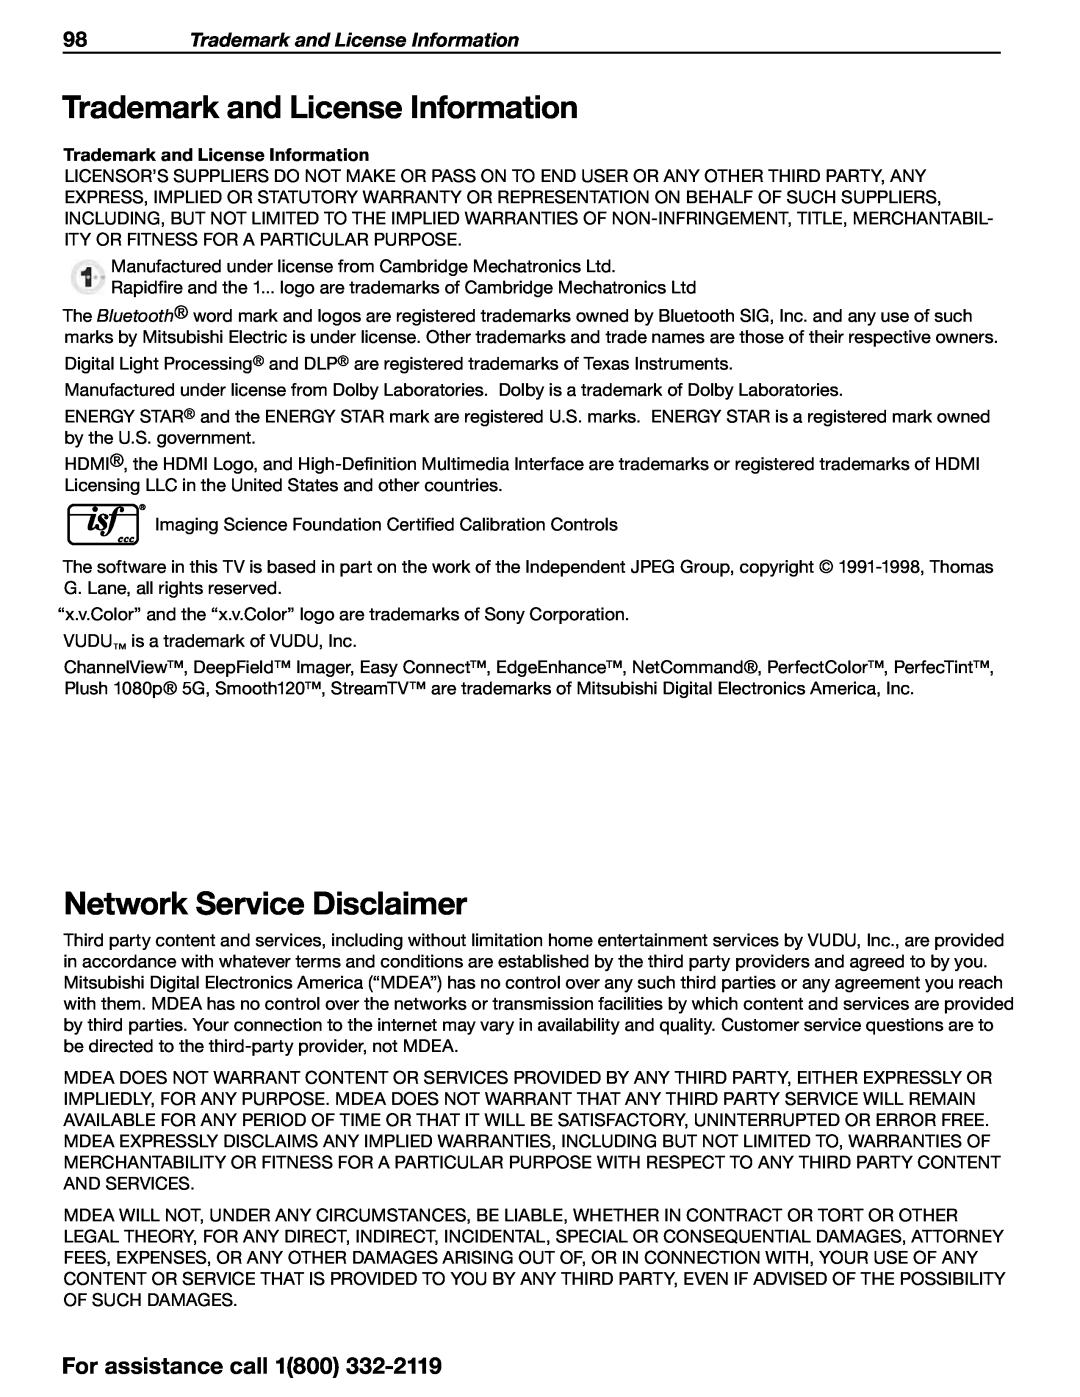 Mitsubishi Electronics 838 SERIES Trademark and License Information, Network Service Disclaimer, For assistance call 1800 